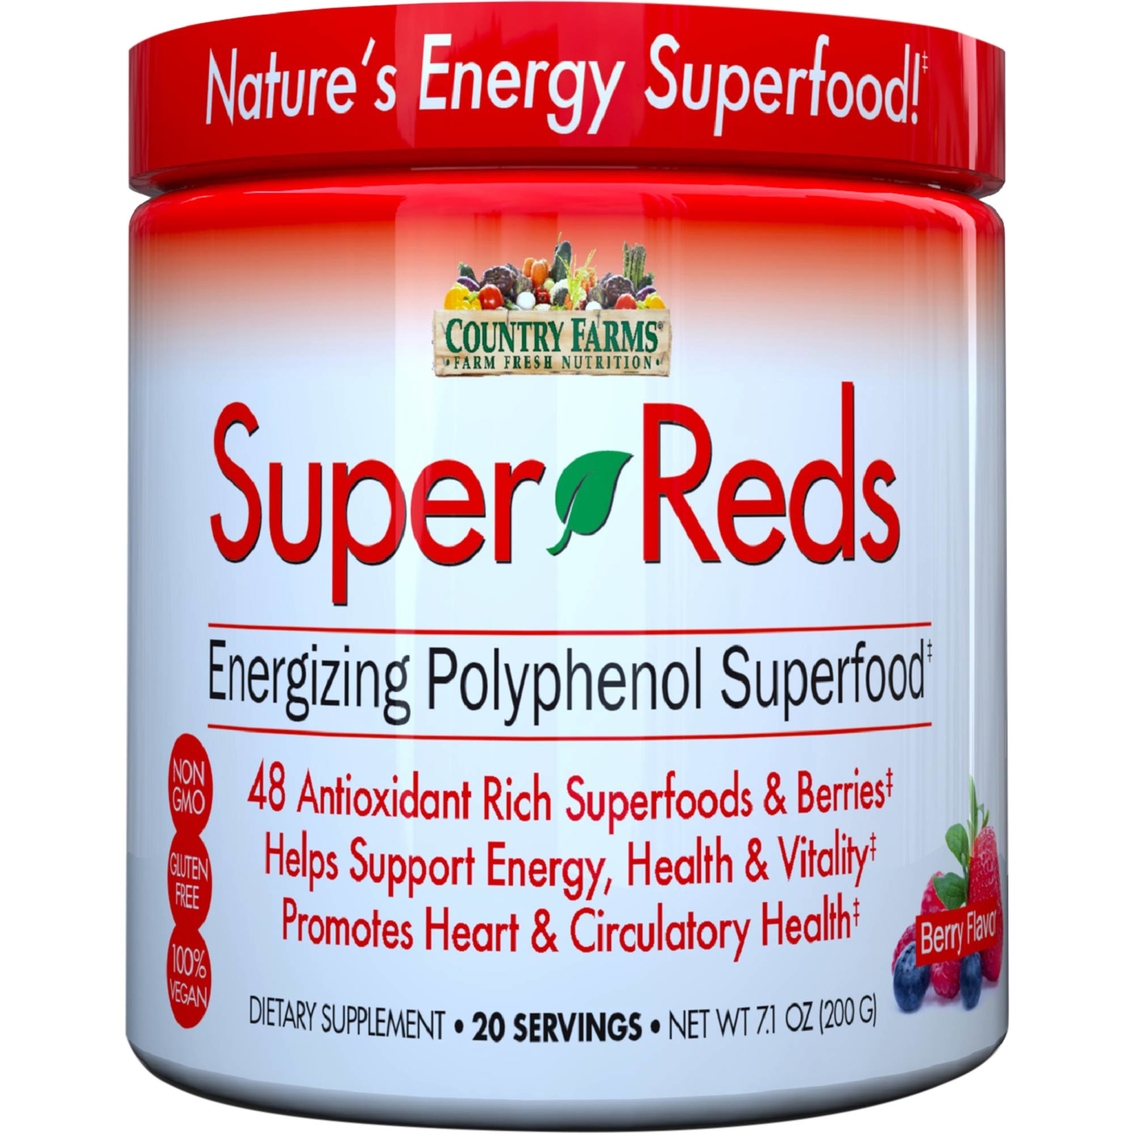 Country Farms Super Reds 20 Servings - Image 1 of 3